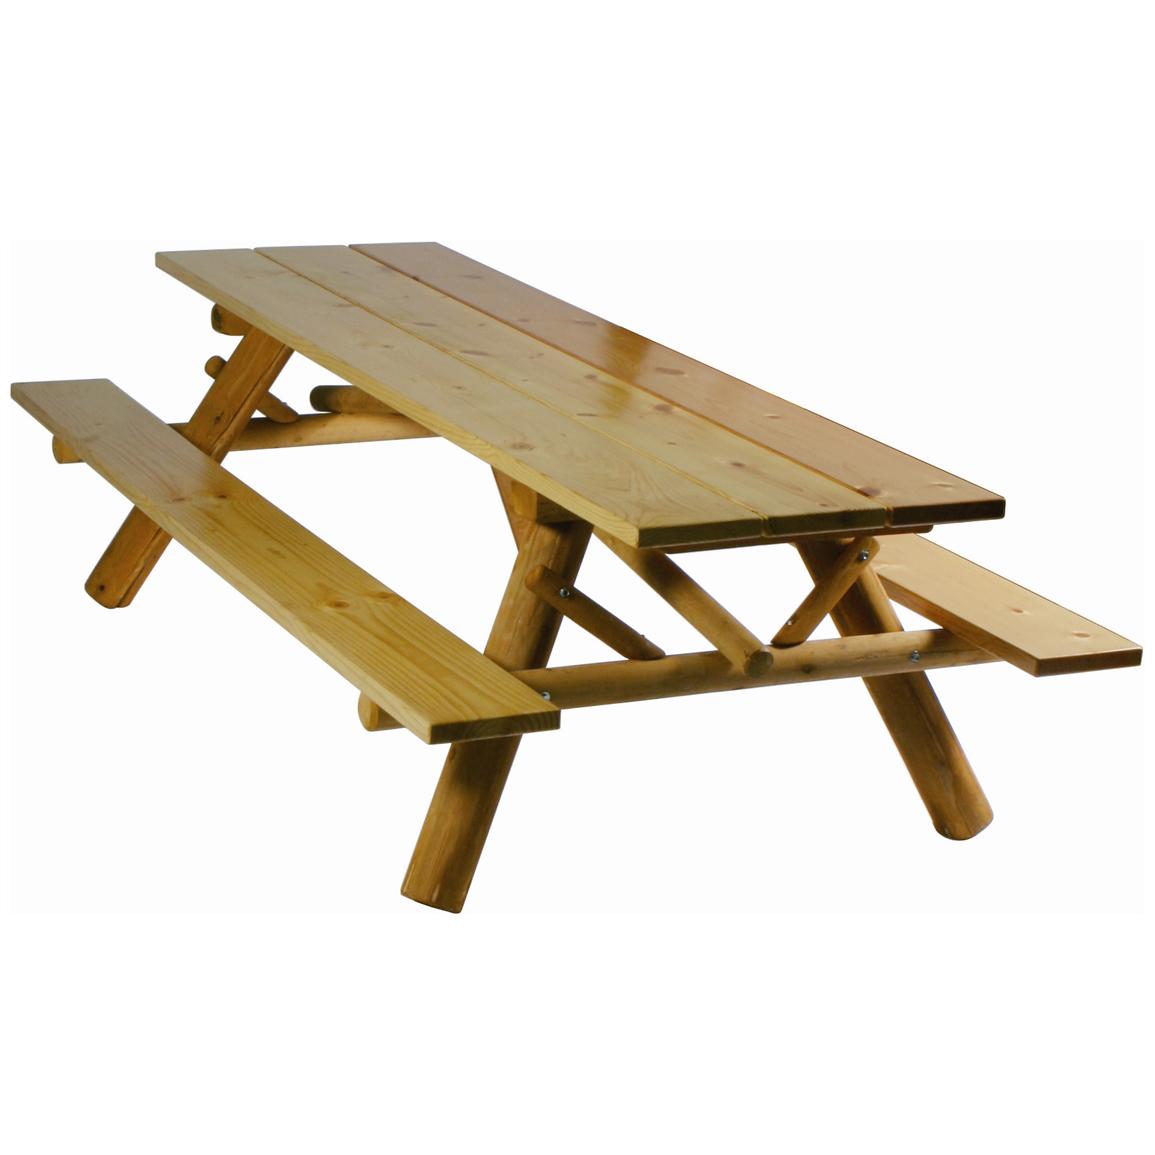 File Name   6 Foot Picnic Table Plans 526559 Jpg Resolution   230 X